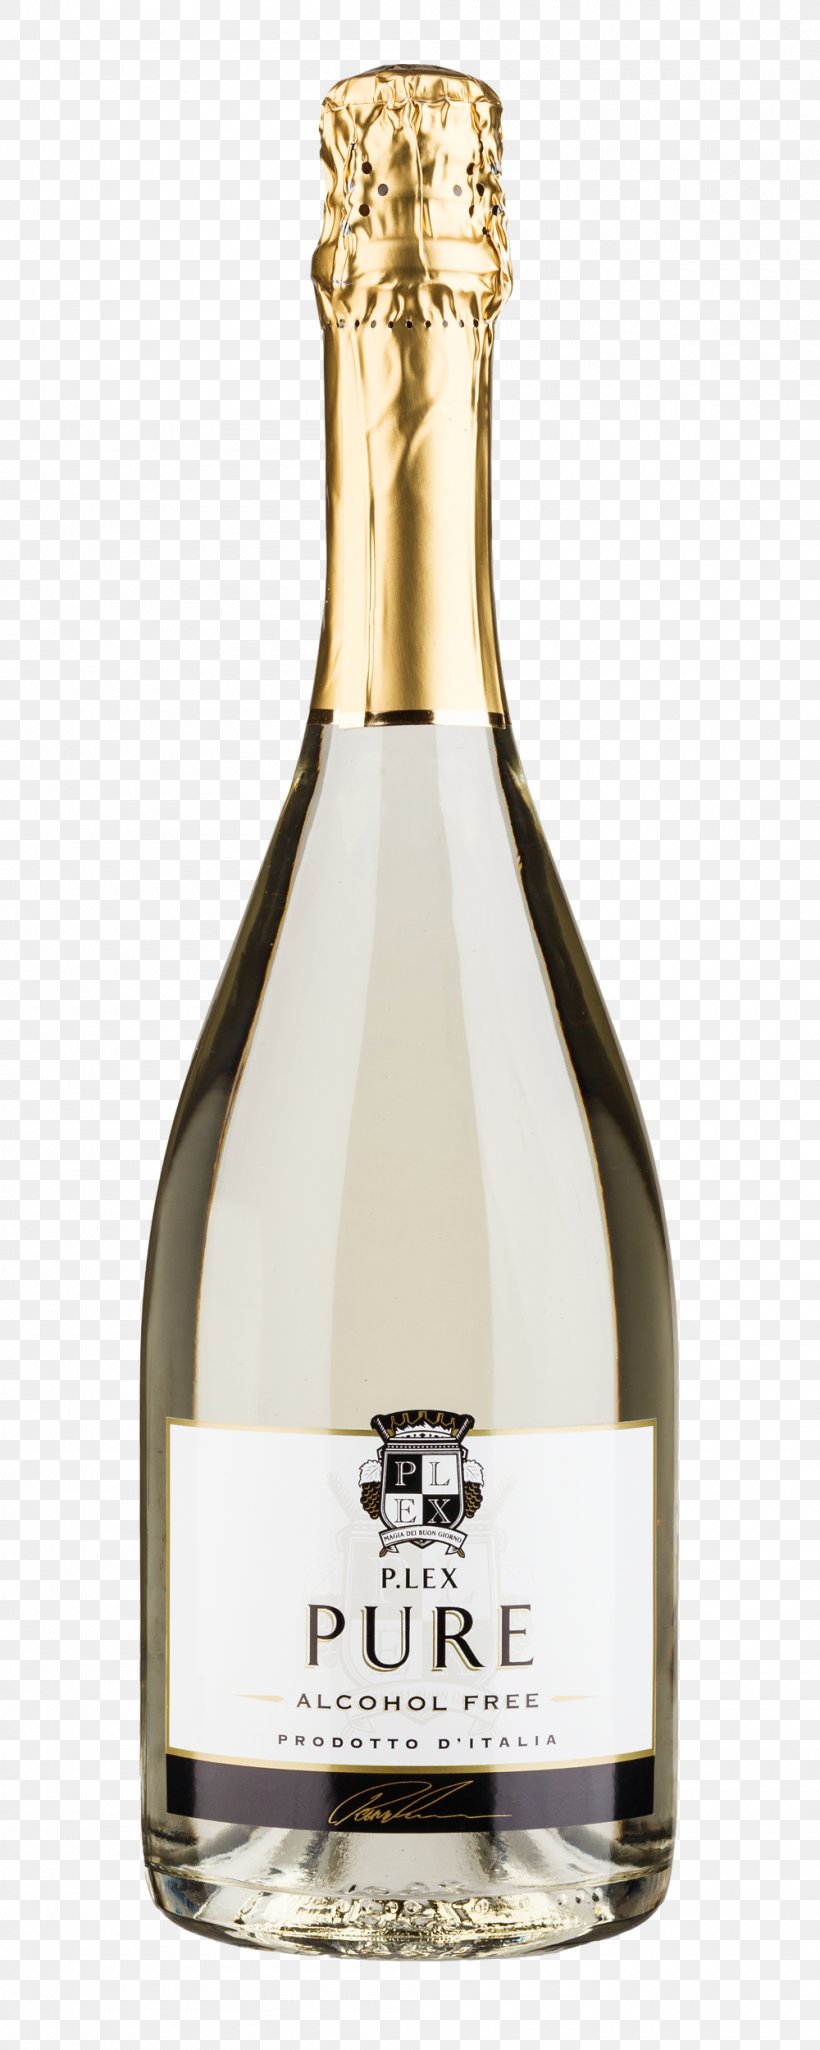 Champagne Glass Bottle, PNG, 1000x2500px, Champagne, Alcoholic Beverage, Bottle, Drink, Glass Download Free